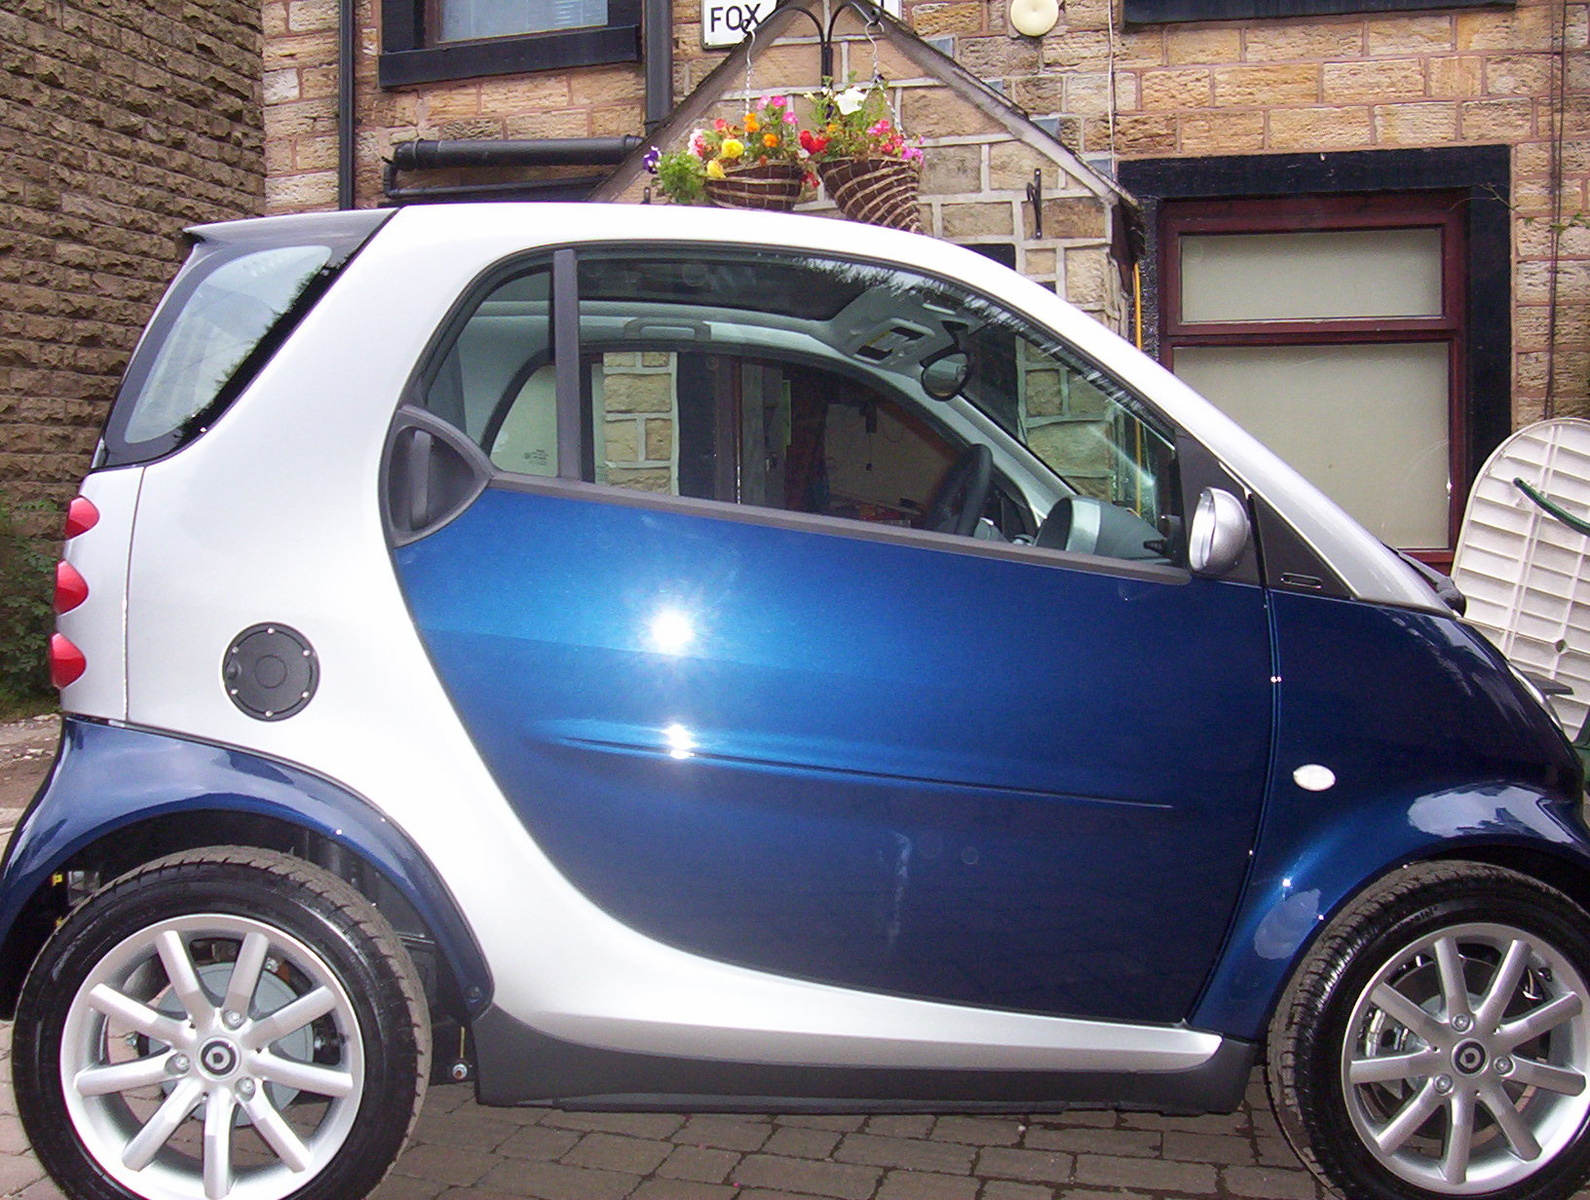 smart Cars: Latest Prices, Reviews, Specs and Photos